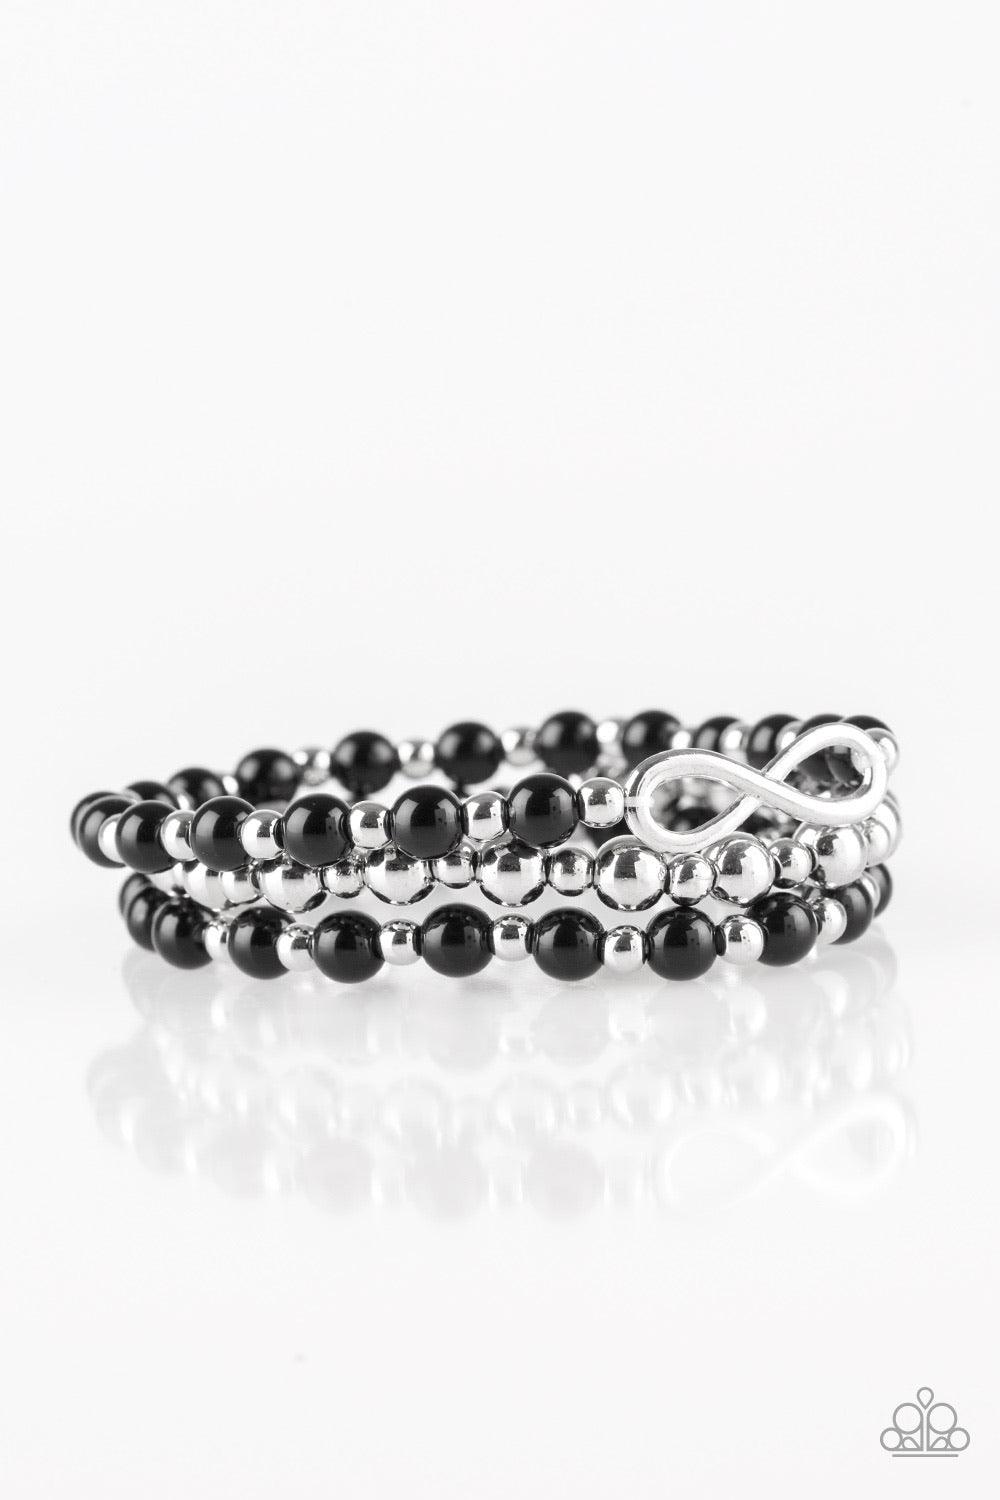 Paparazzi Accessories Immeasurable Infinite - Black Polished black and shiny silver beads are threaded along stretchy bands, creating colorful layers around the wrist. A dainty silver infinity charm adorns one strand for a whimsical finish. Sold as one se